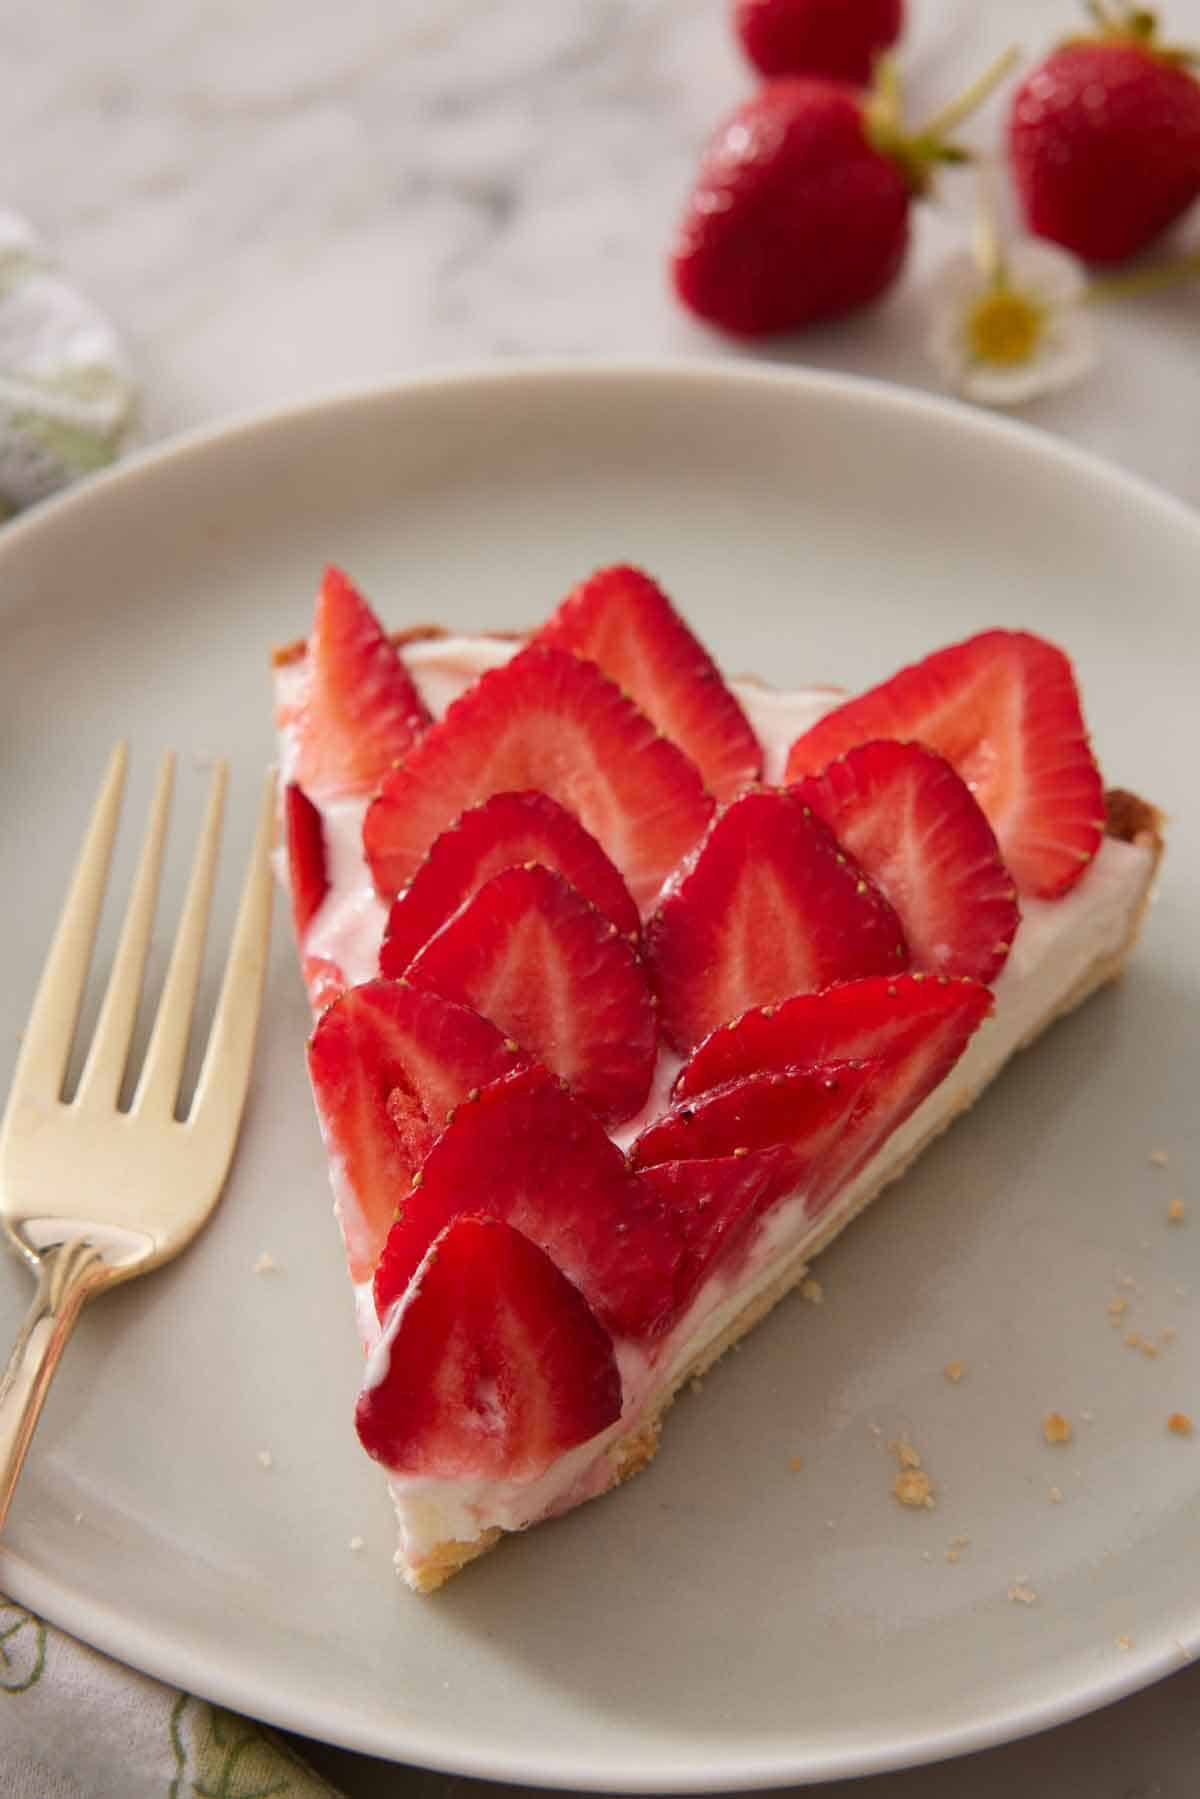 A plate with a slice of strawberry tart with a fork.